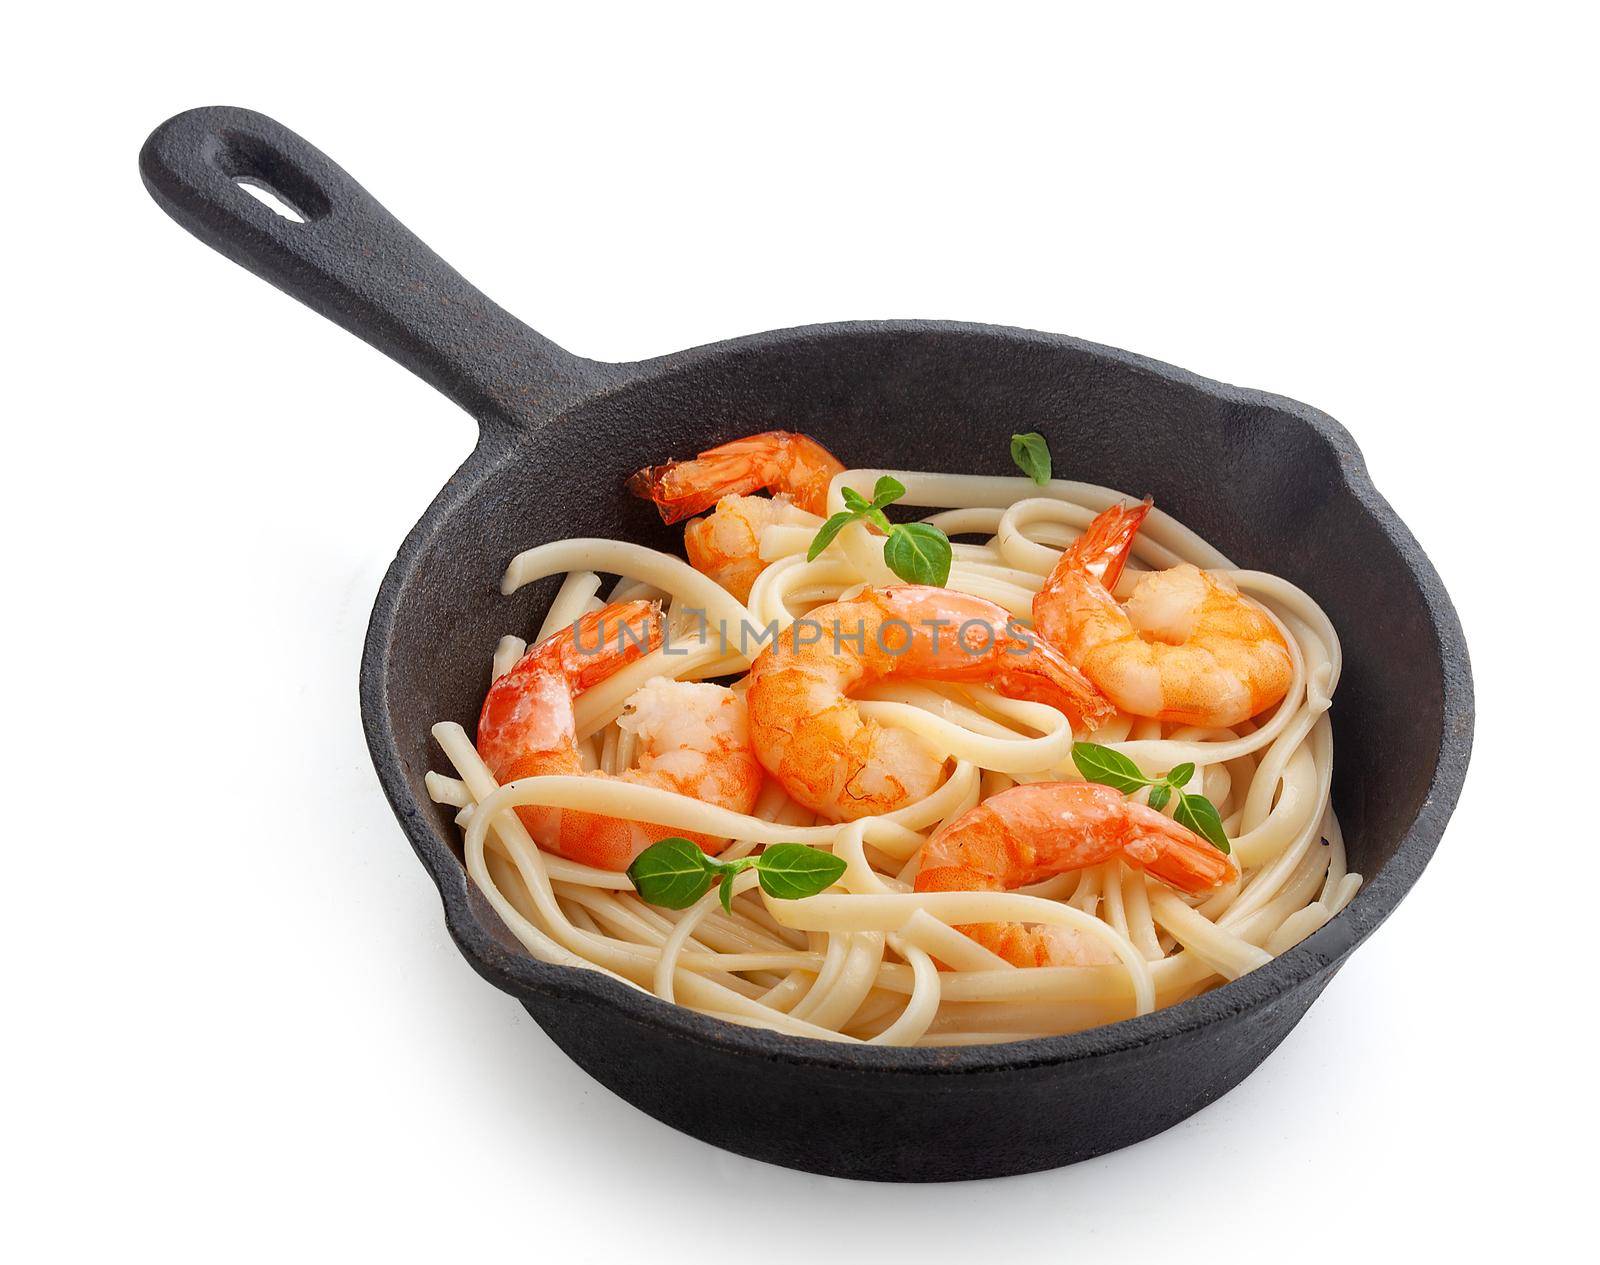 Shrimps with pasta in the iron pan by Angorius